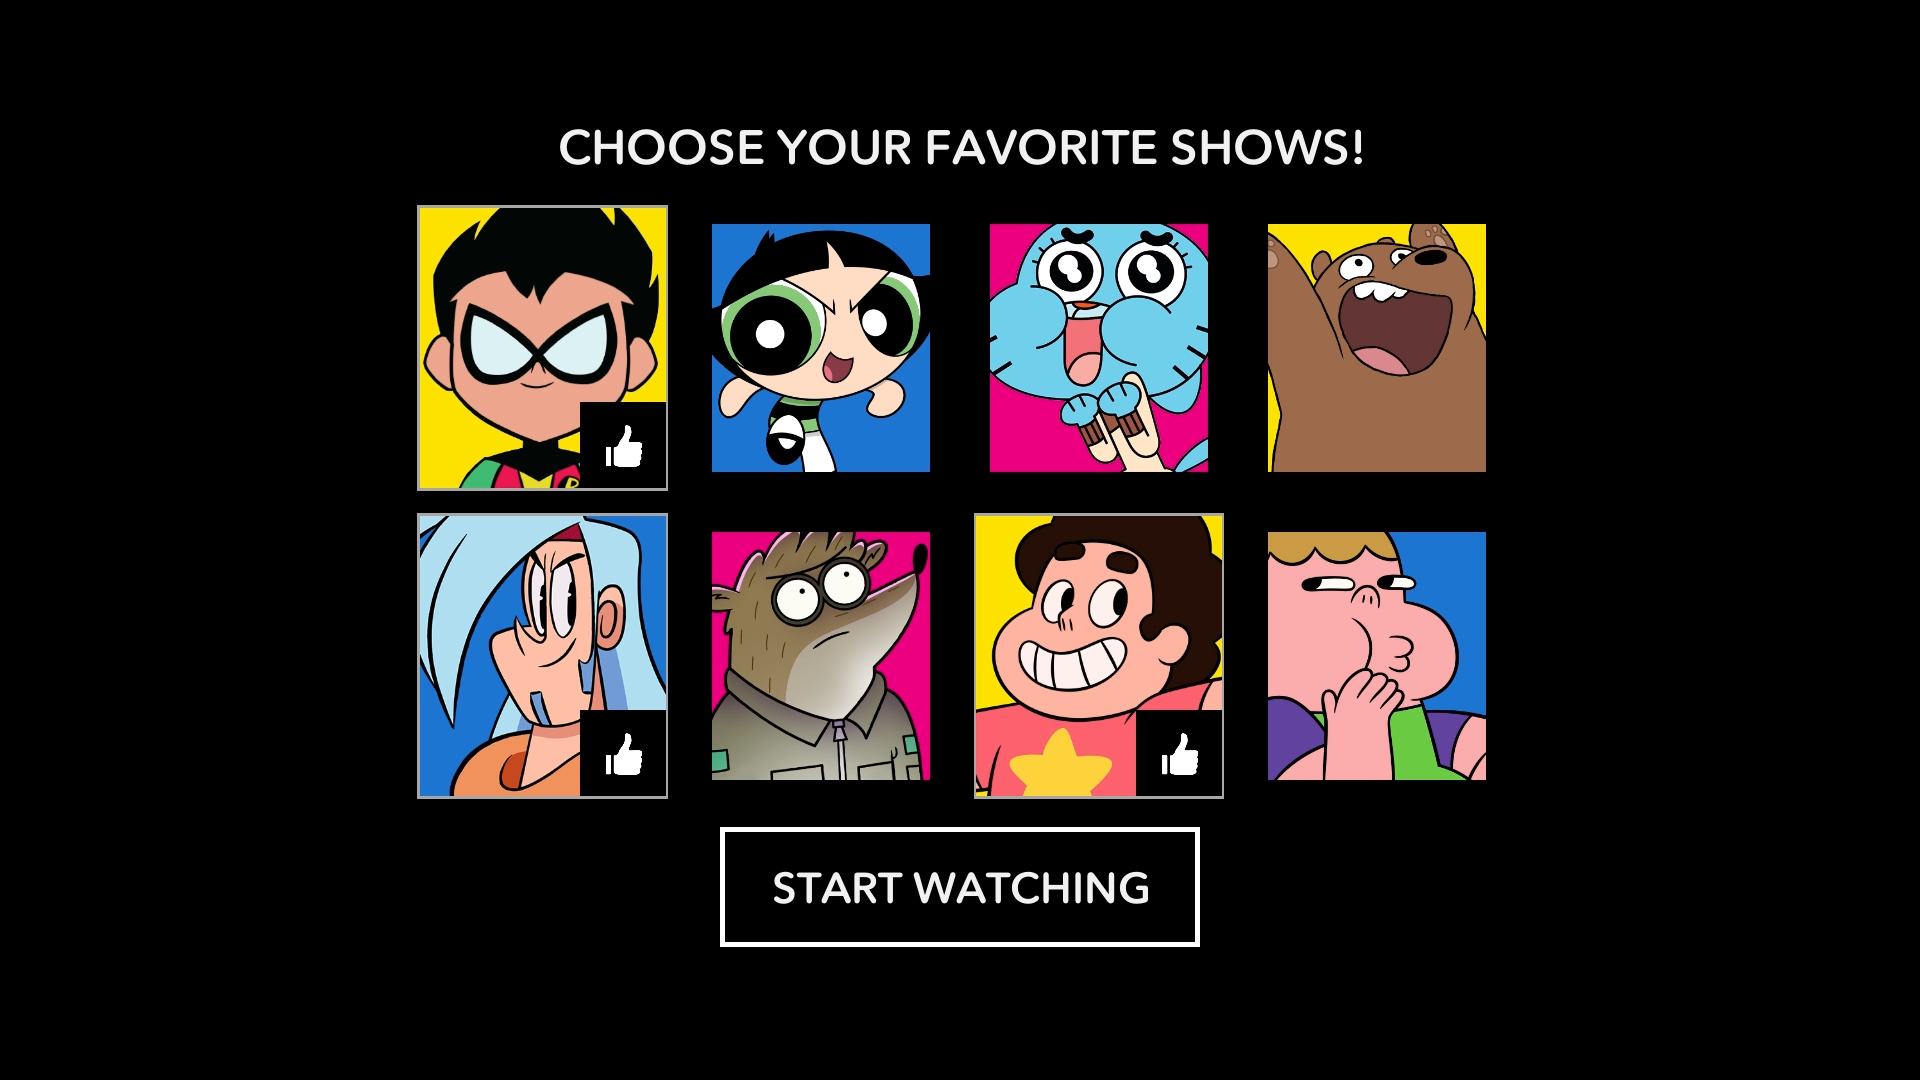 App Lets You Collect Figures, Play Games While Watching 'Cartoon Network